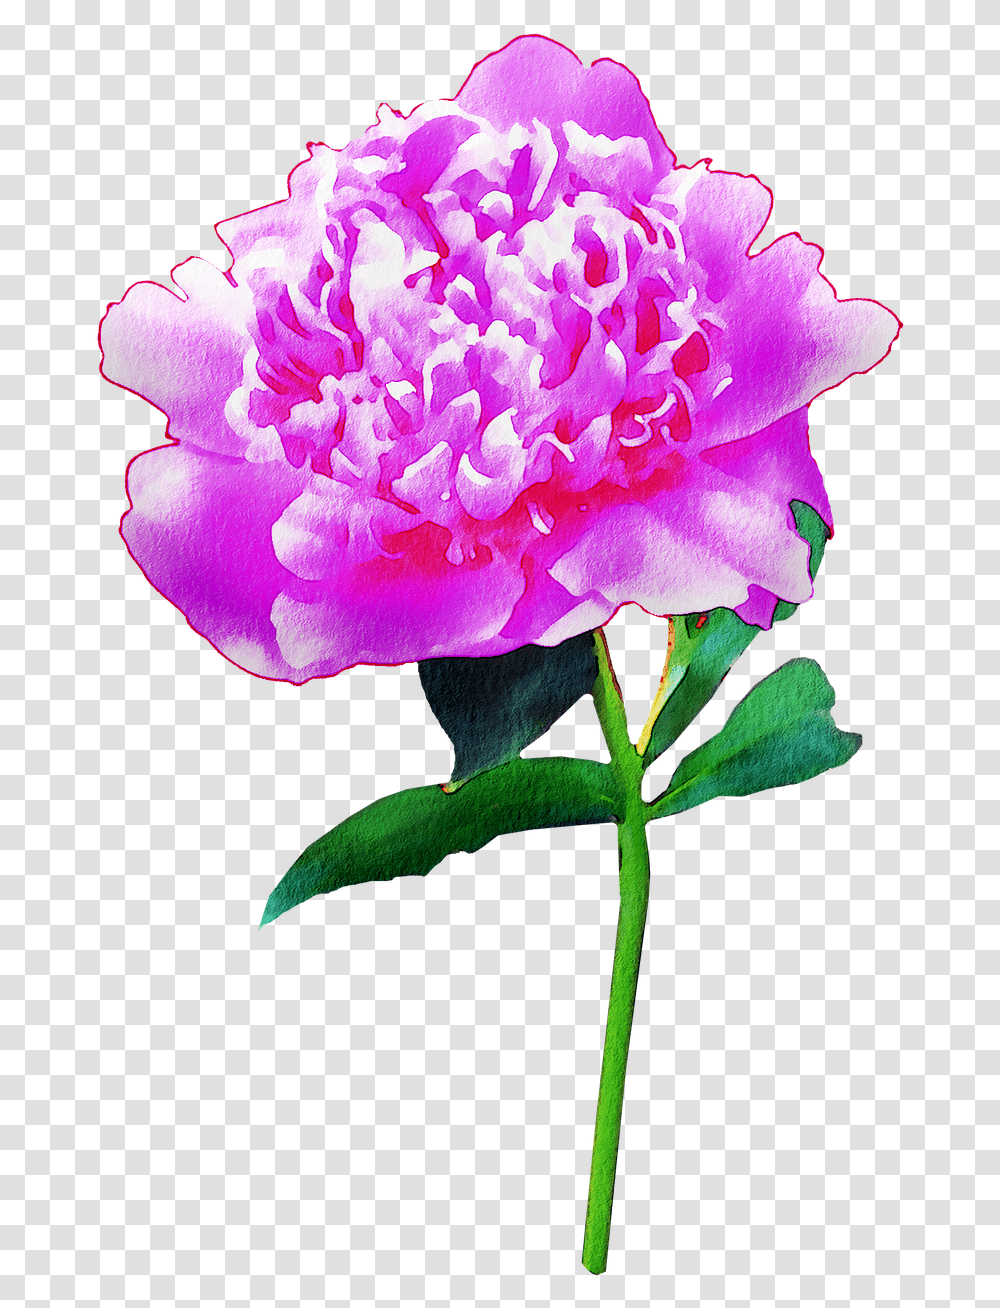 Watercolor Flowers Floral Pink Free Image On Pixabay Common Peony, Plant, Blossom, Geranium, Petal Transparent Png